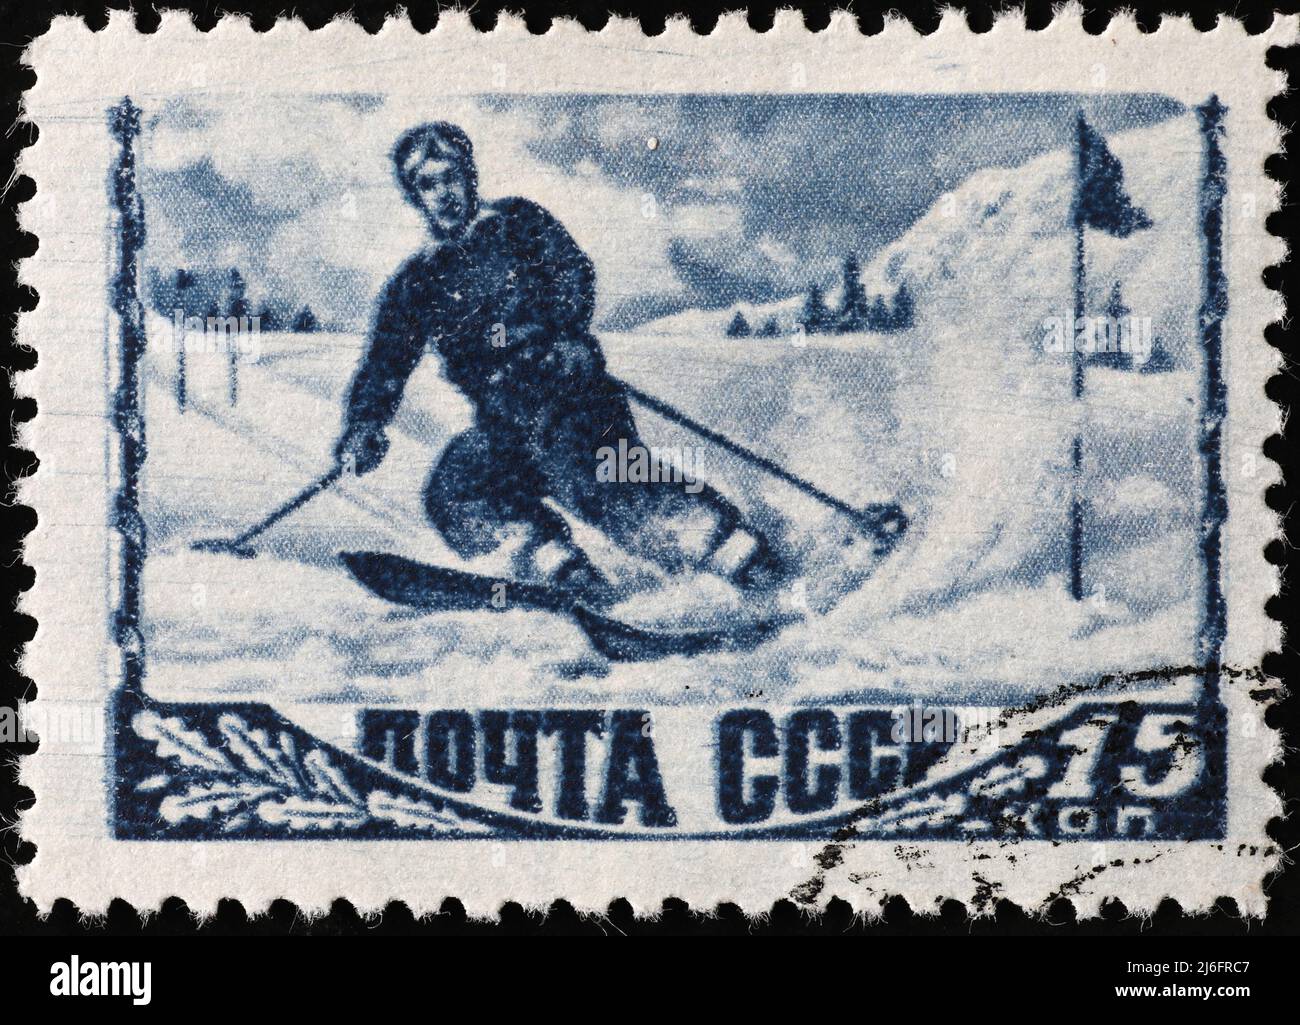 Vintage skier on old russian postage stamp Stock Photo